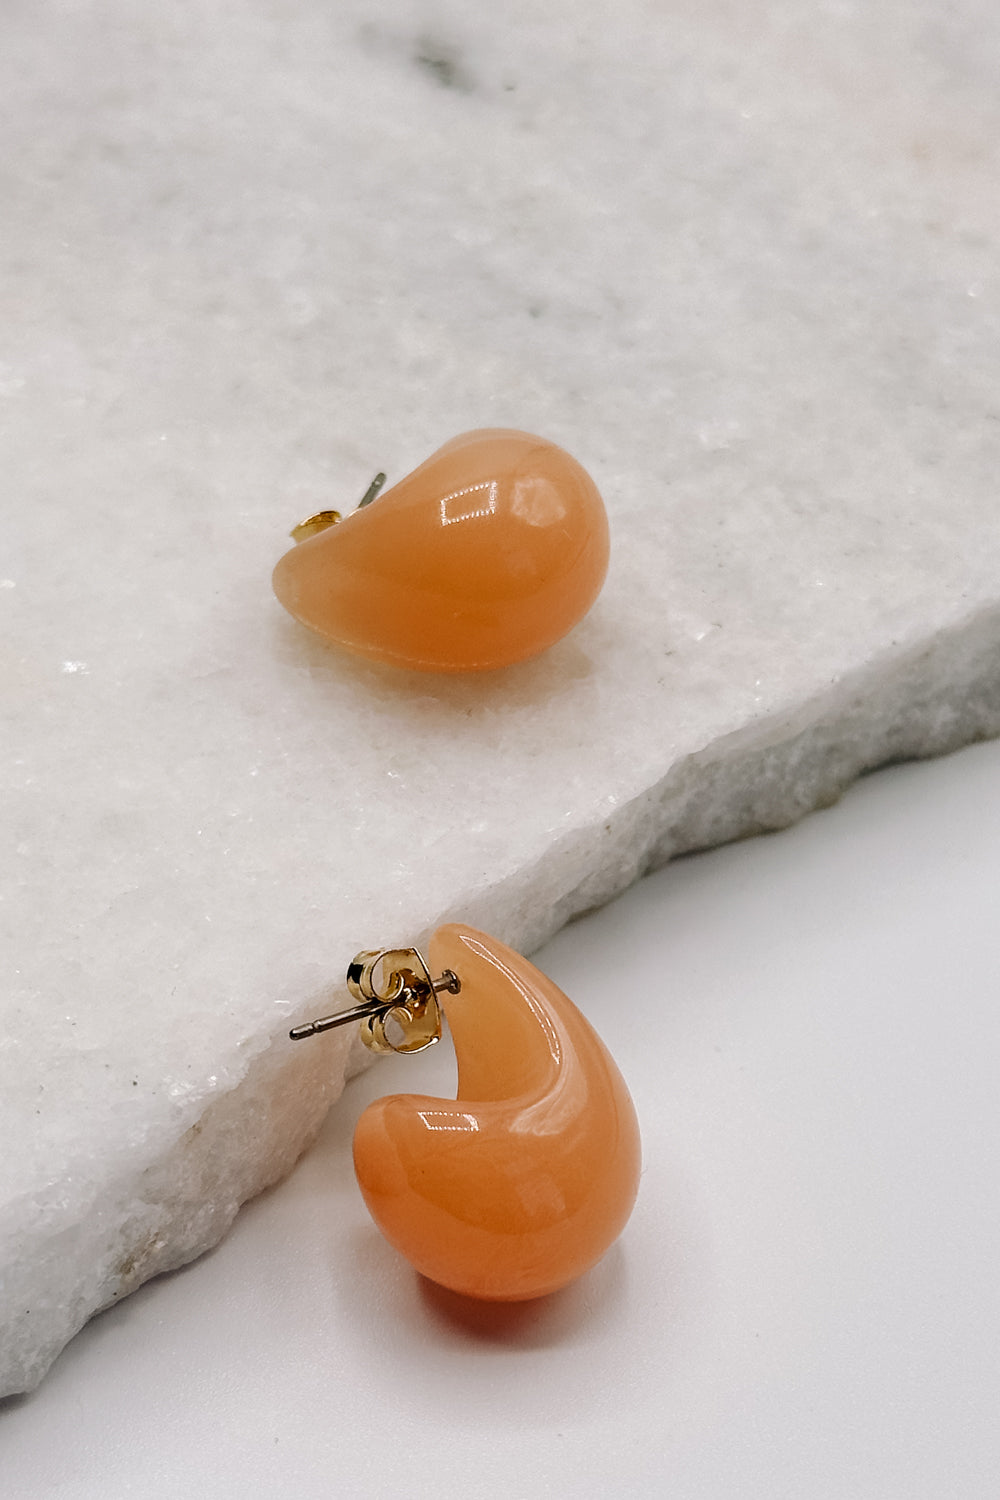 Close up view of the Sophie Peach Scoop Hoop Earring which features peach scooped mini hoops